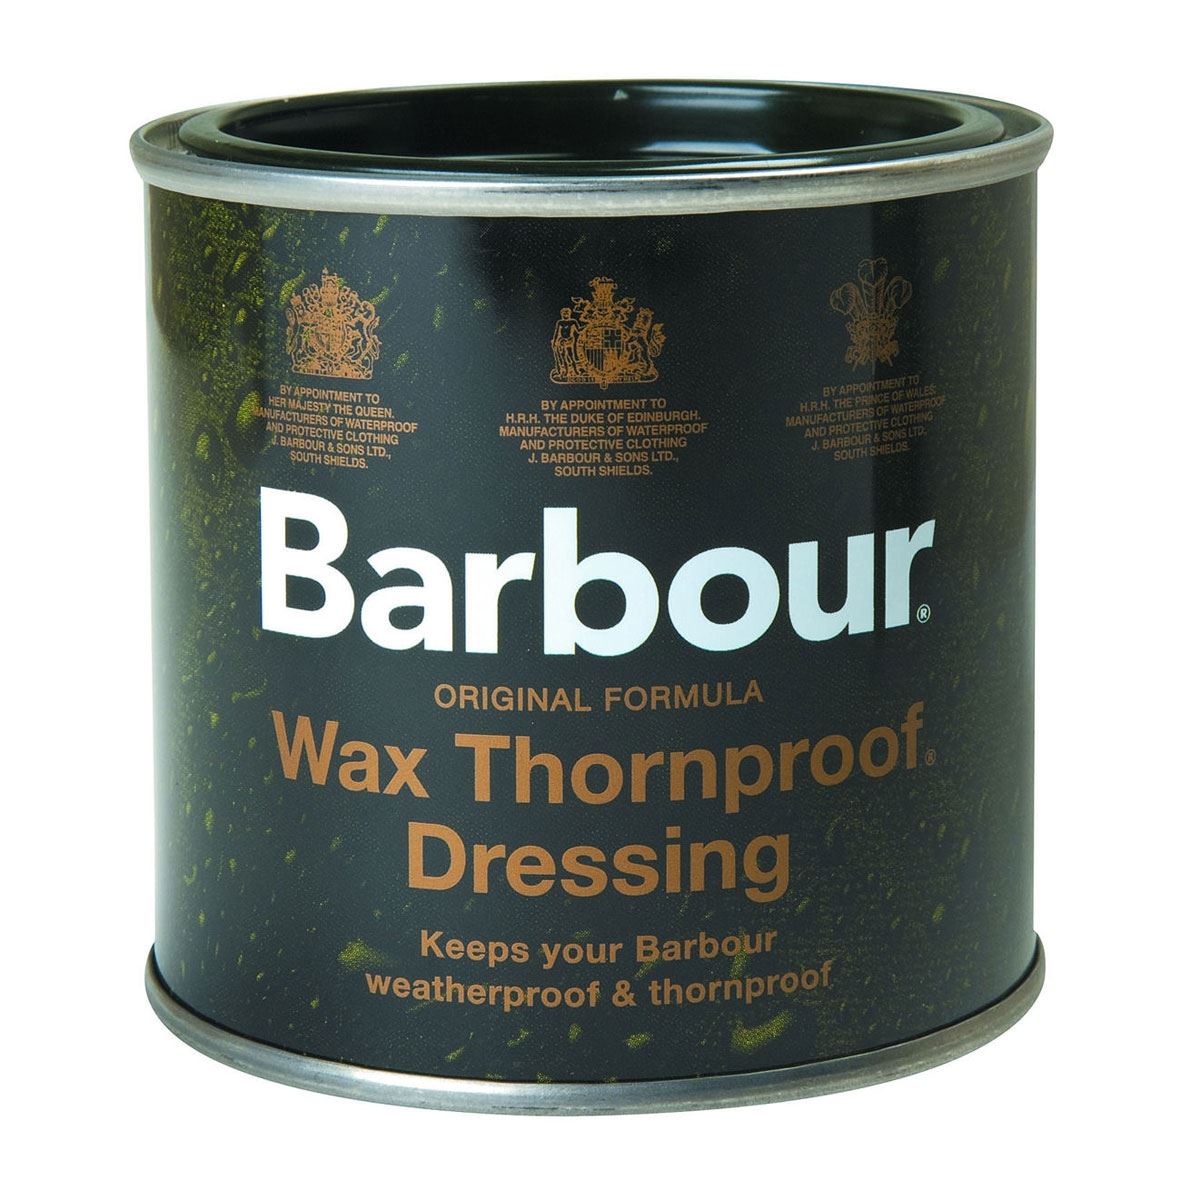 How many tins of Barbour wax for re-waxing?